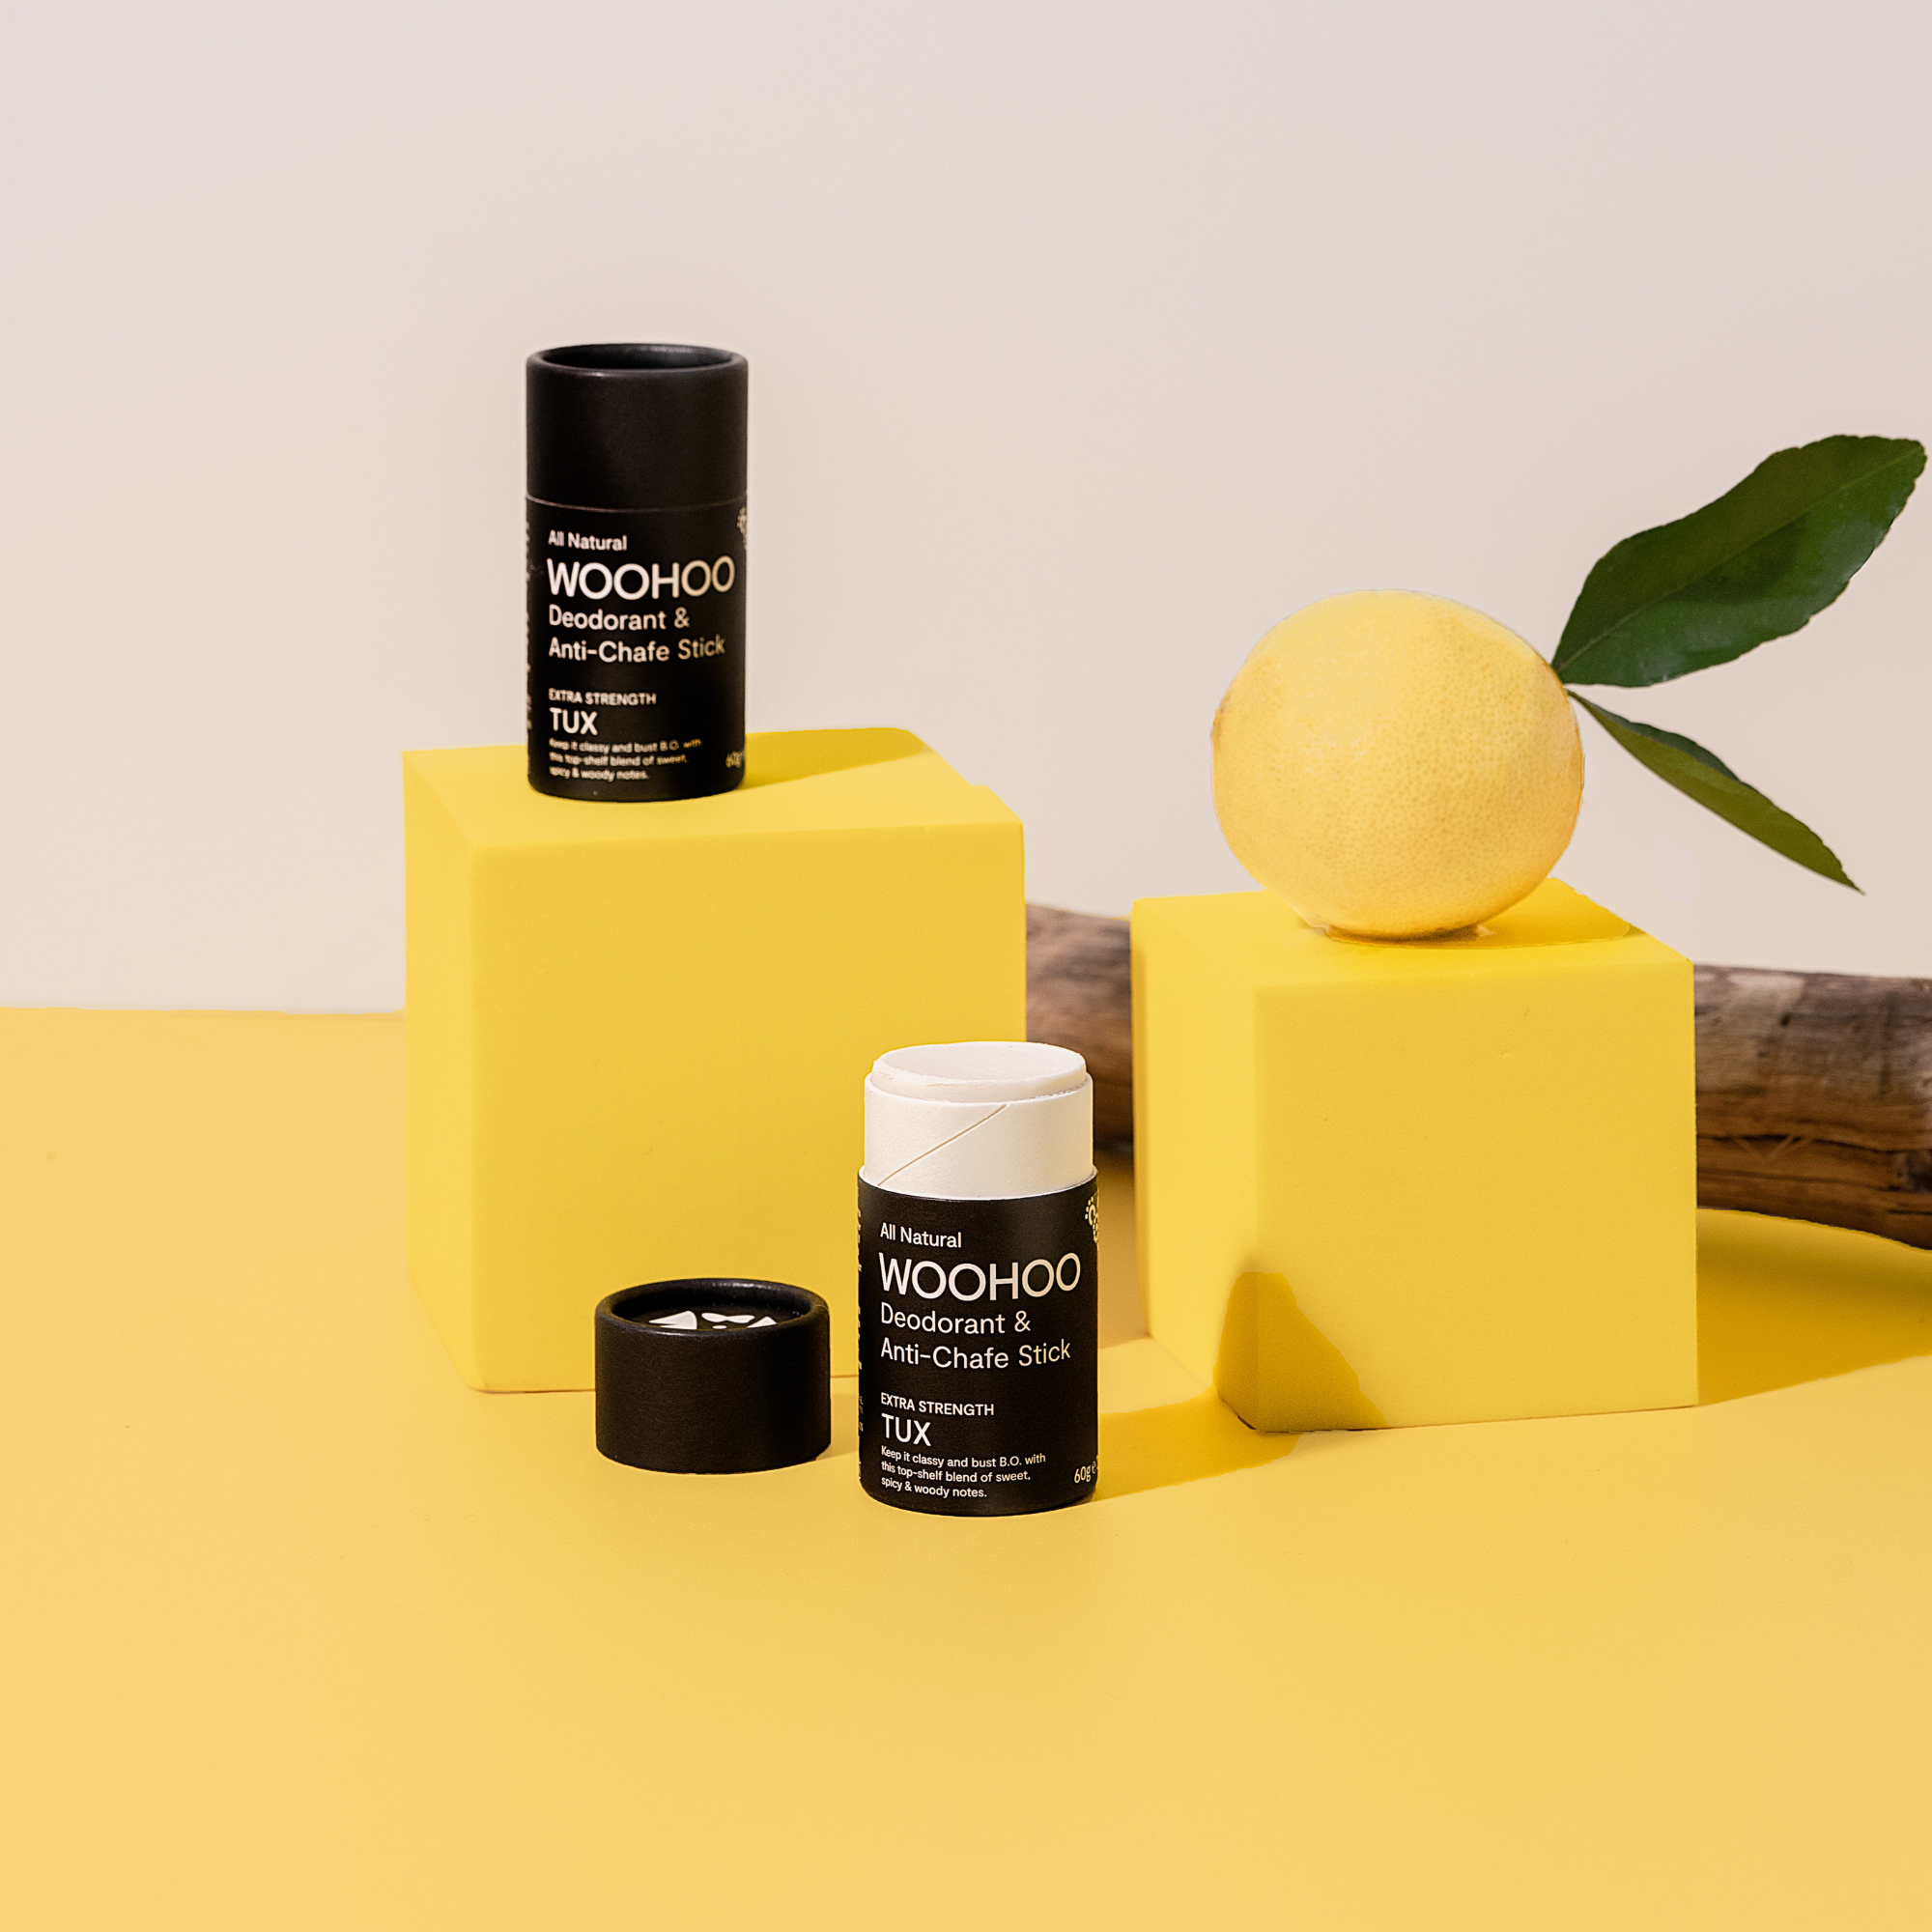 woohoo body deodorant and anti-chafe stick tux extra strength with lemon and tree branch